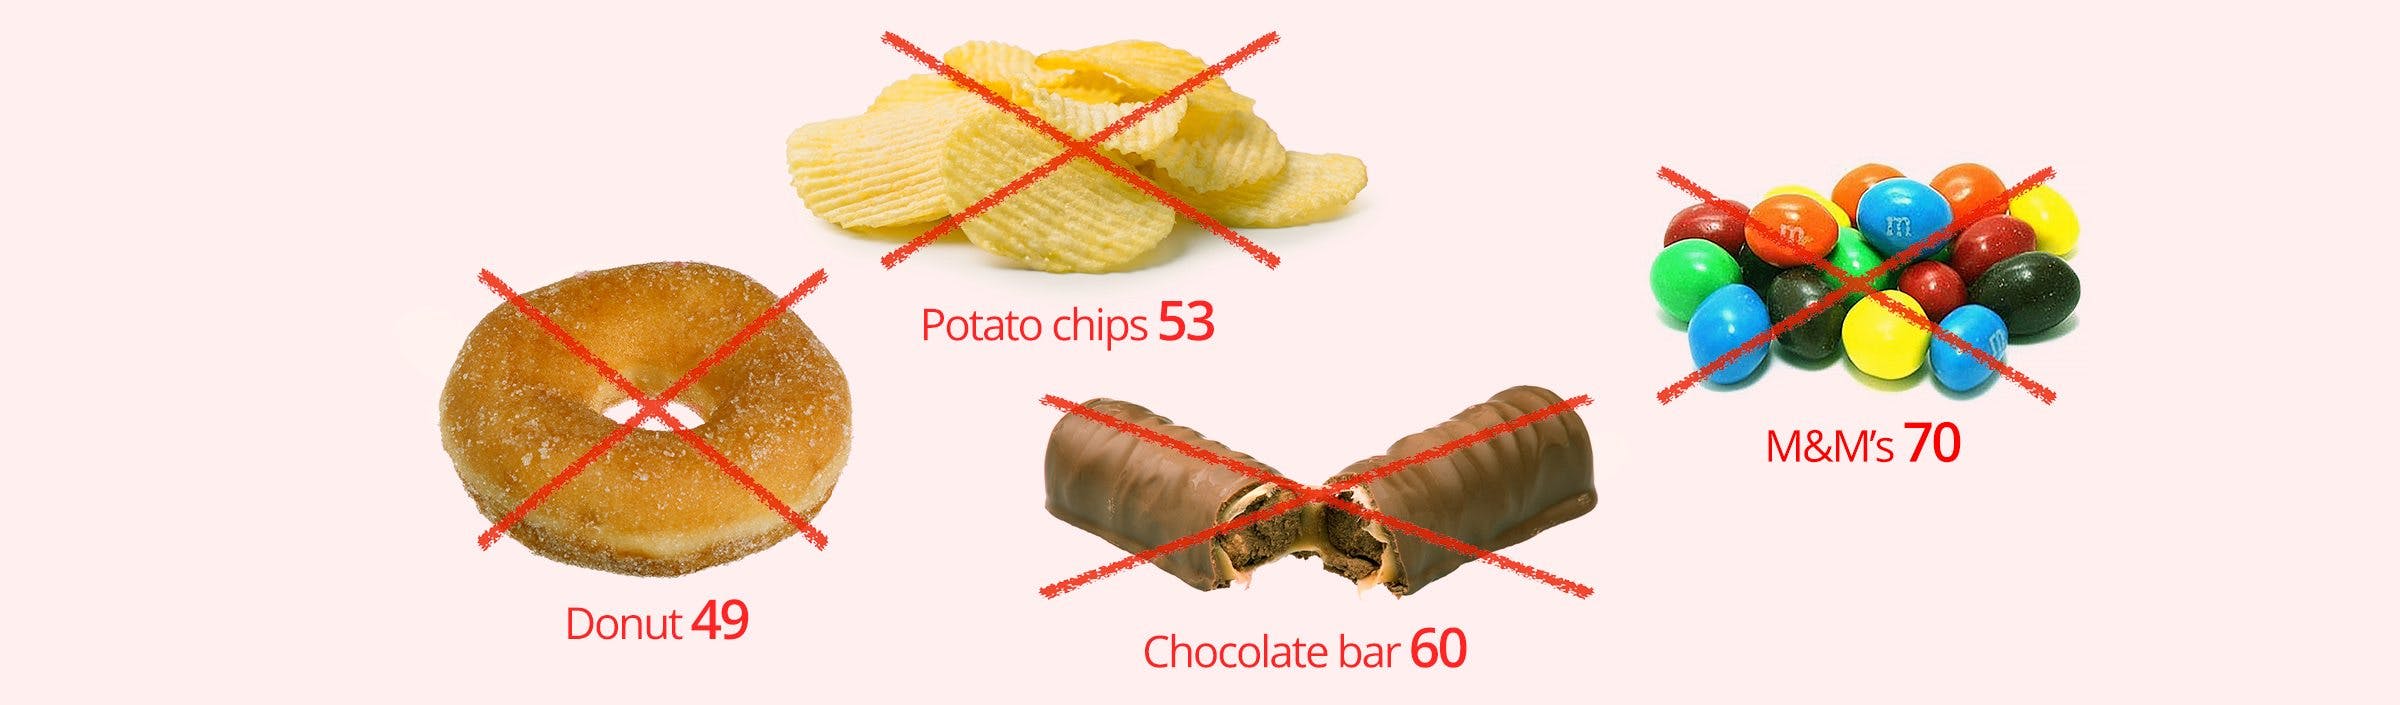 Low carb snacks: Terrible options